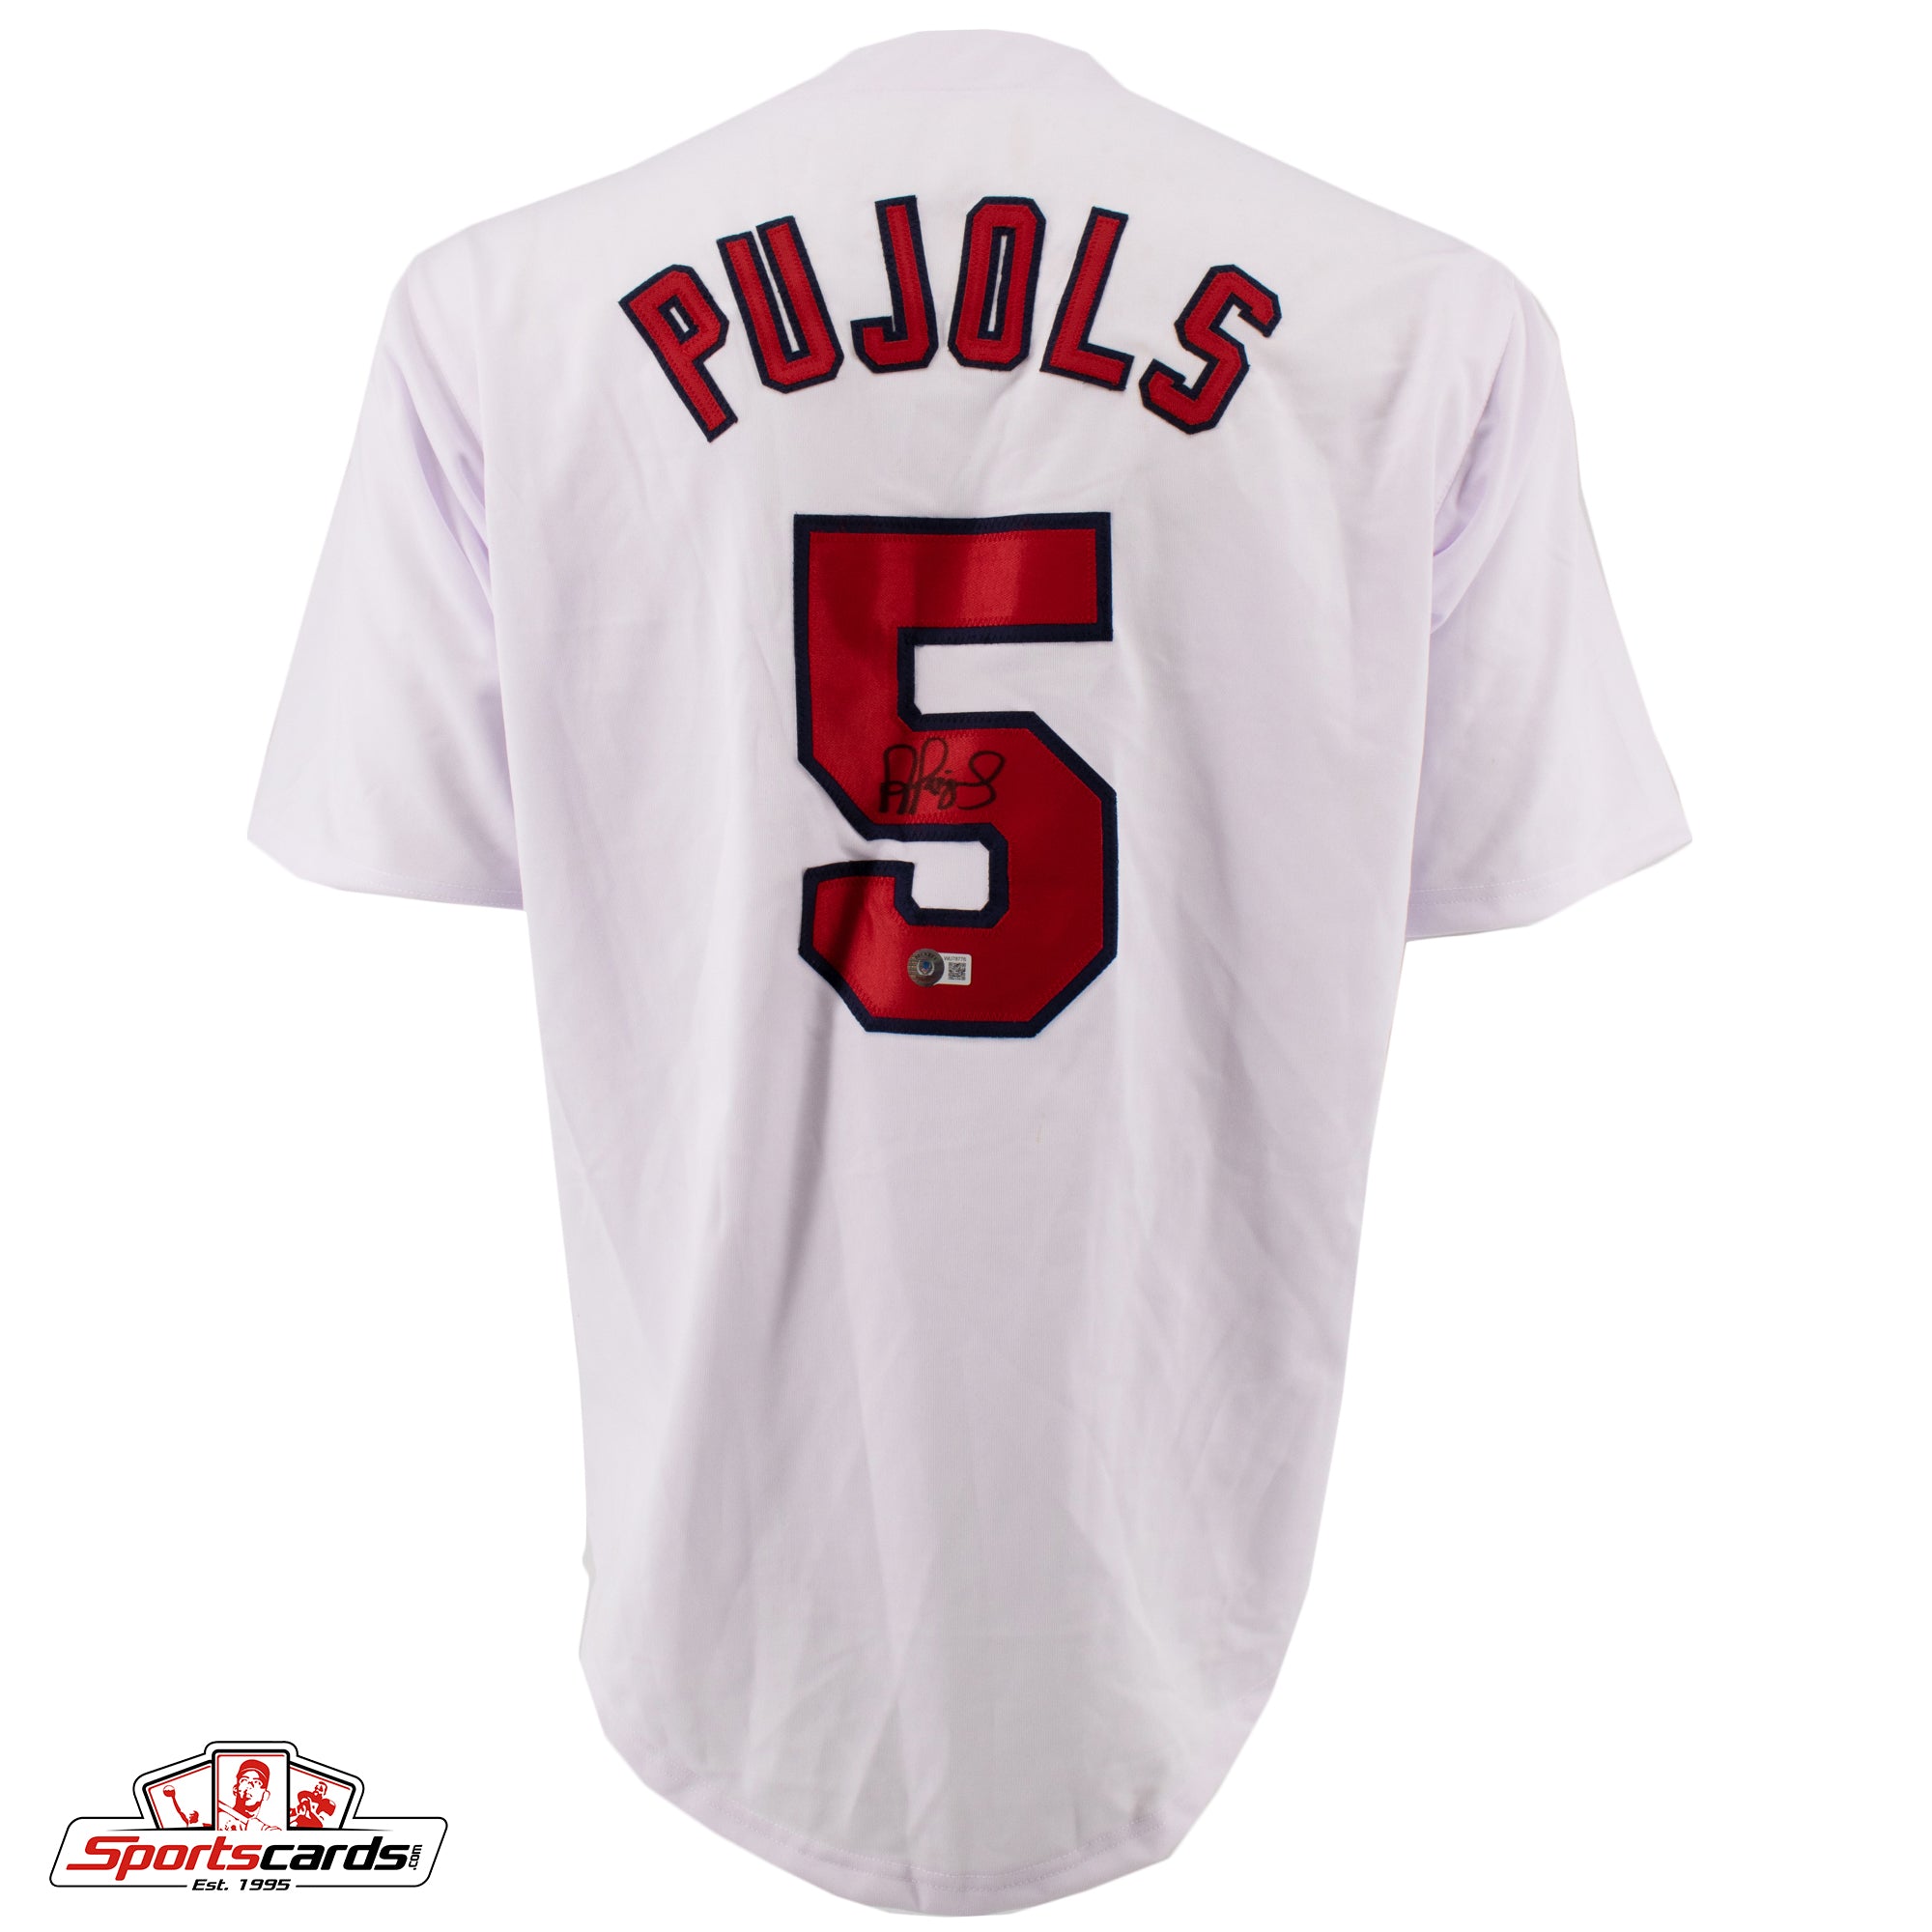 Albert Pujols Signed Autographed Jersey Beckett (BAS) Witnessed